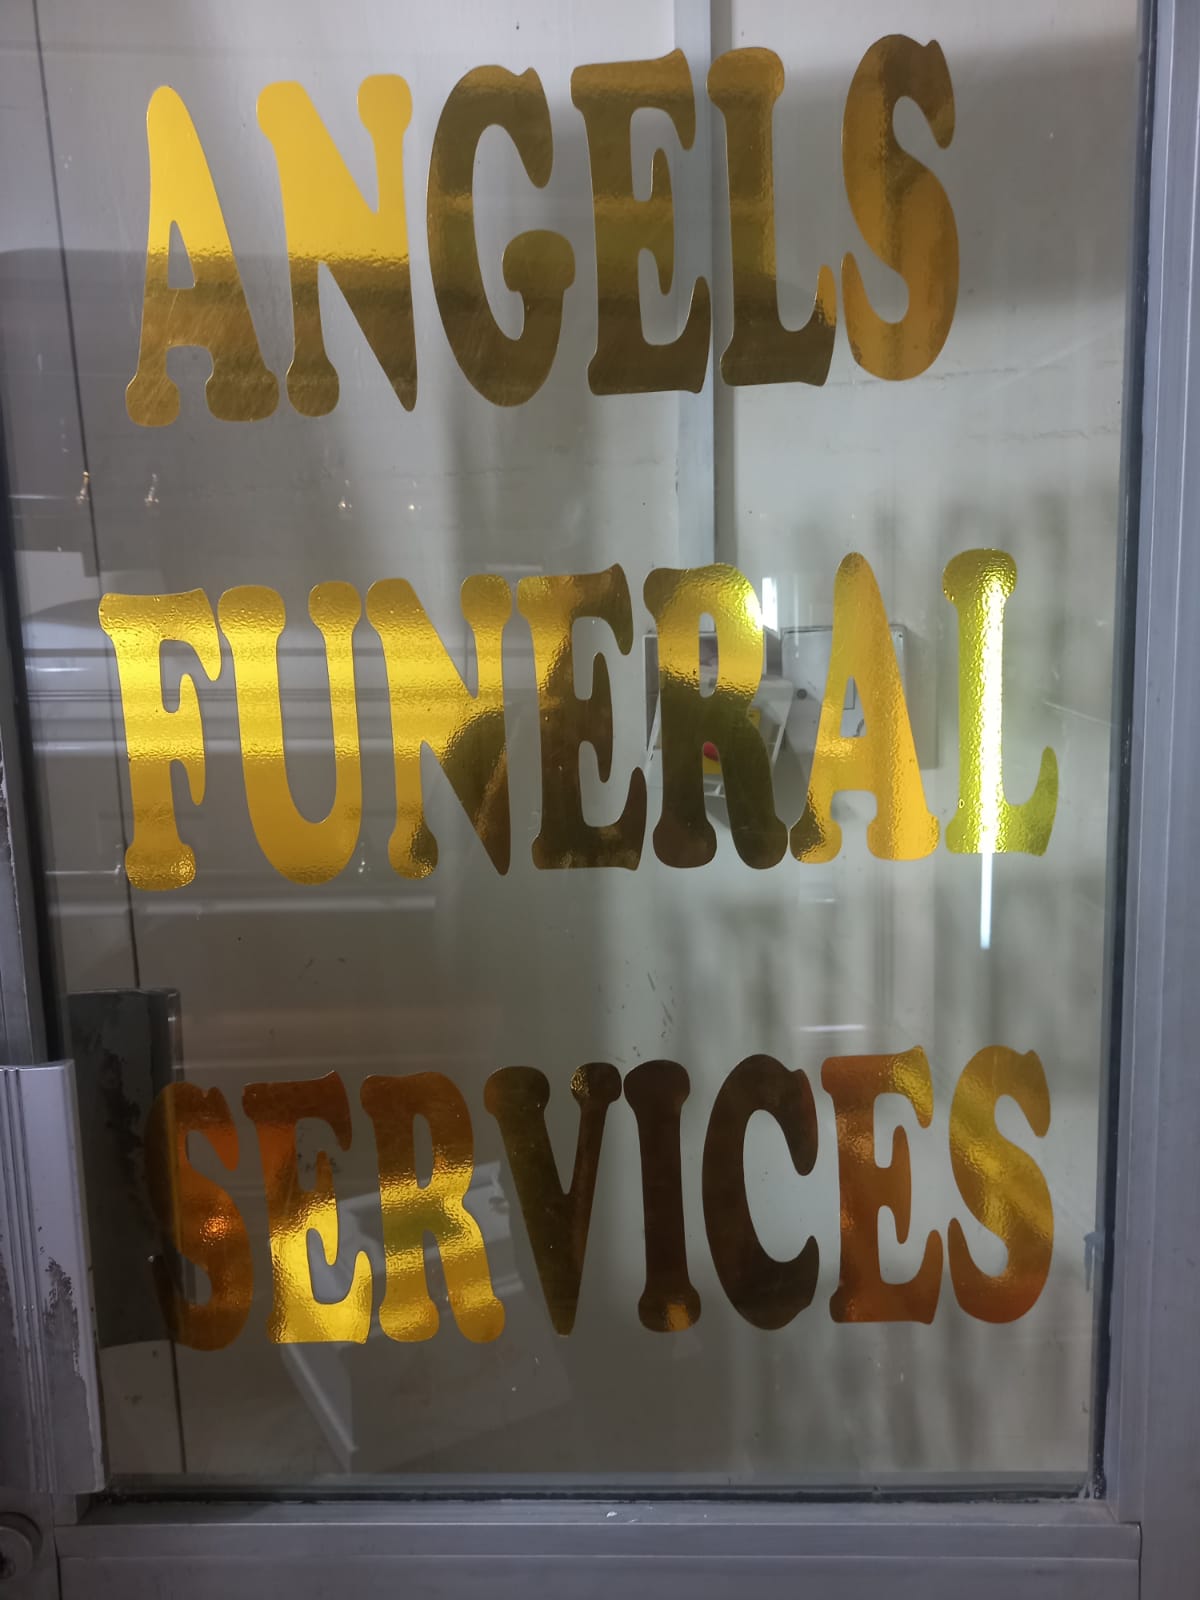 Angels Funeral Home